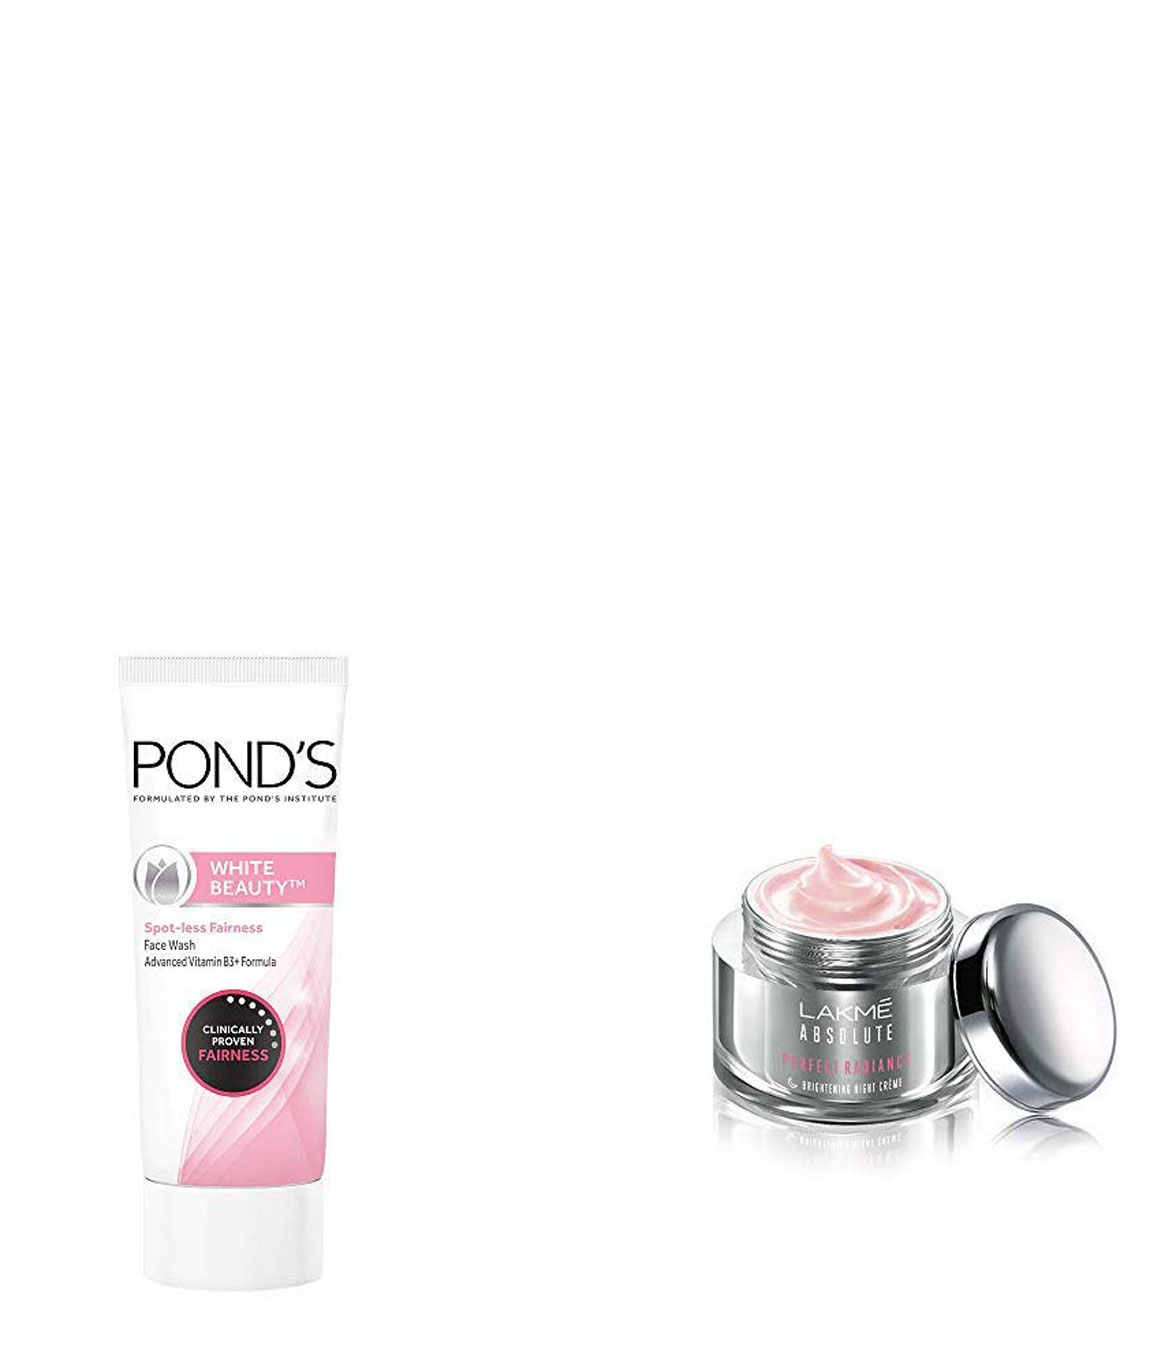 Ponds White Beauty Spot Less Fairness Face Wash, 200 gm & Lakme Absolute Perfect Radiance Skin Lightening Night Creme, 50gm